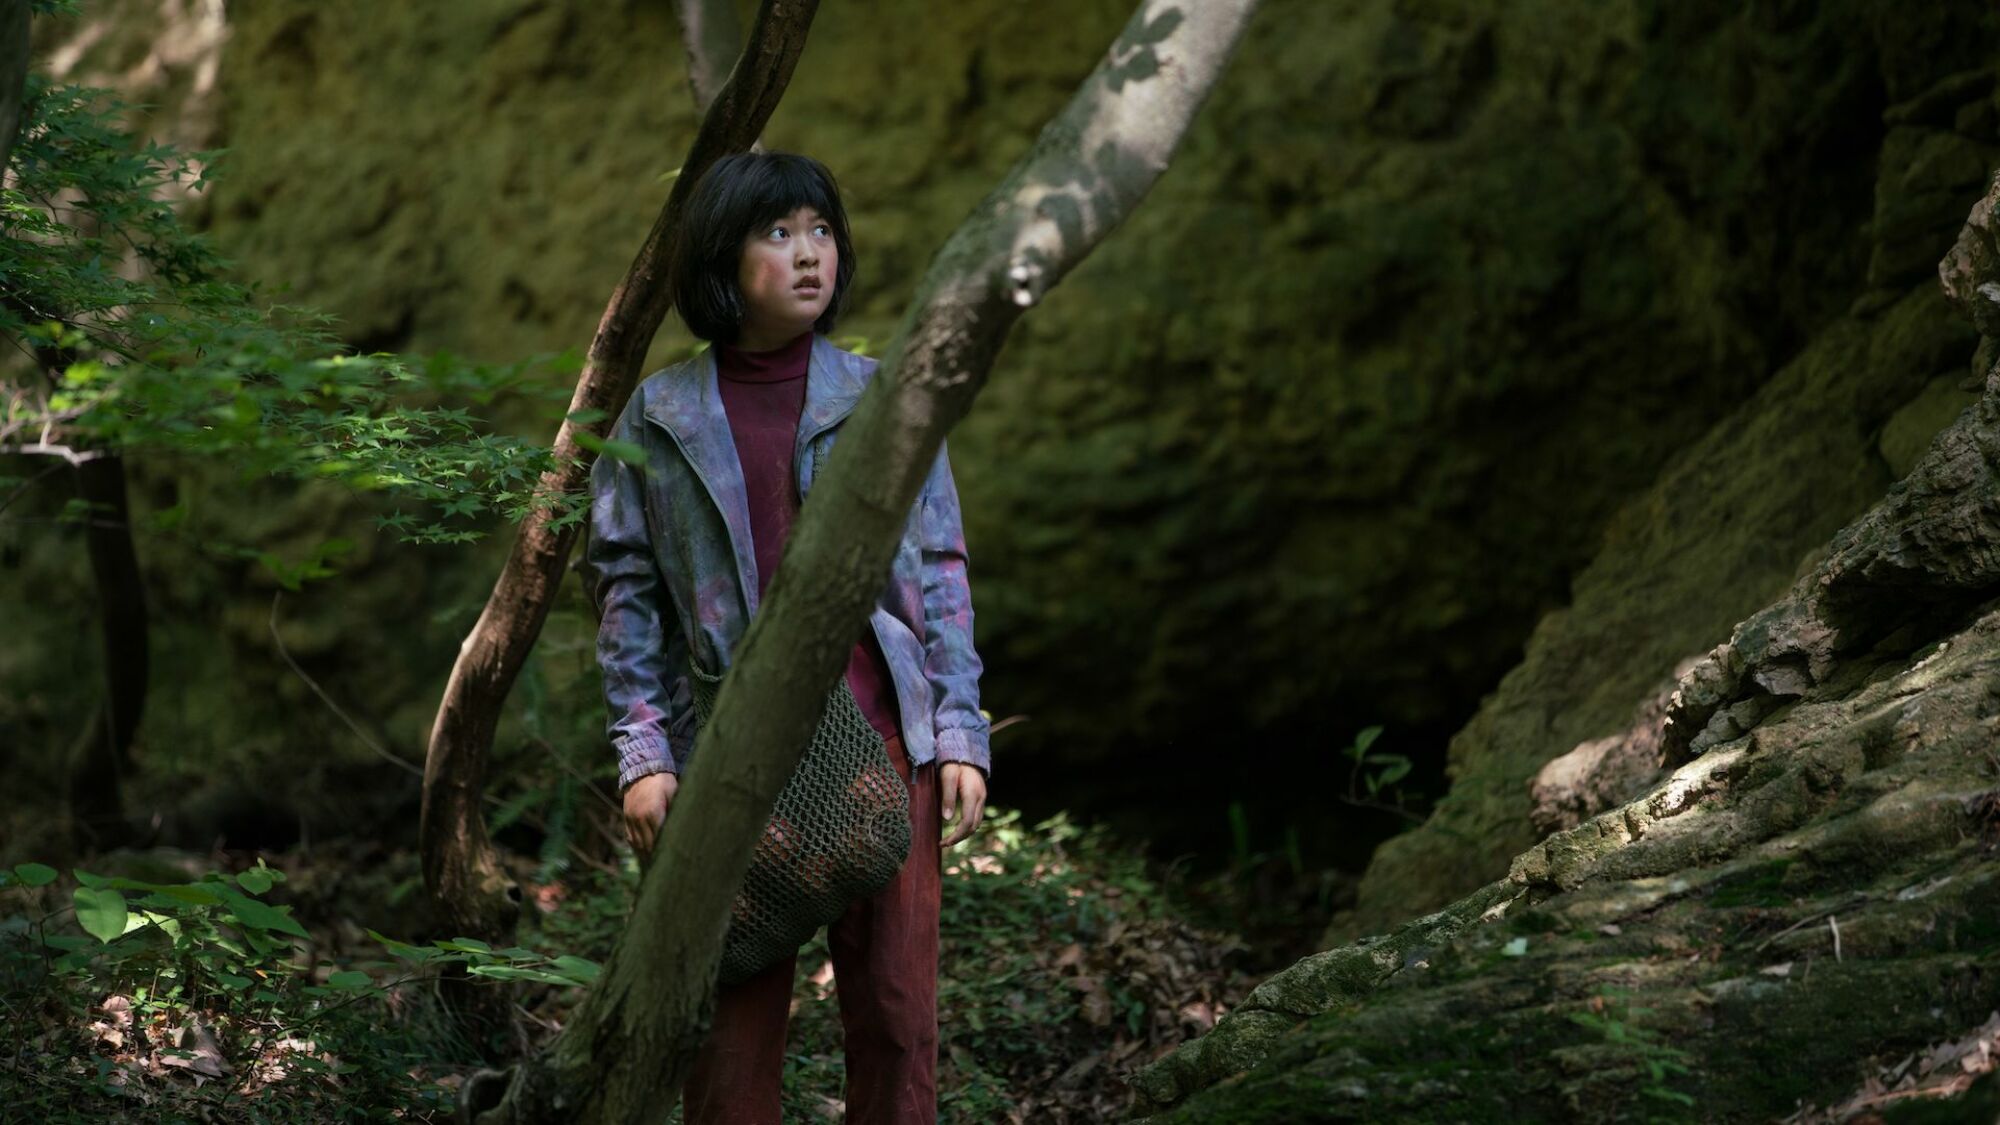 Young girl in the forest in "Okja"